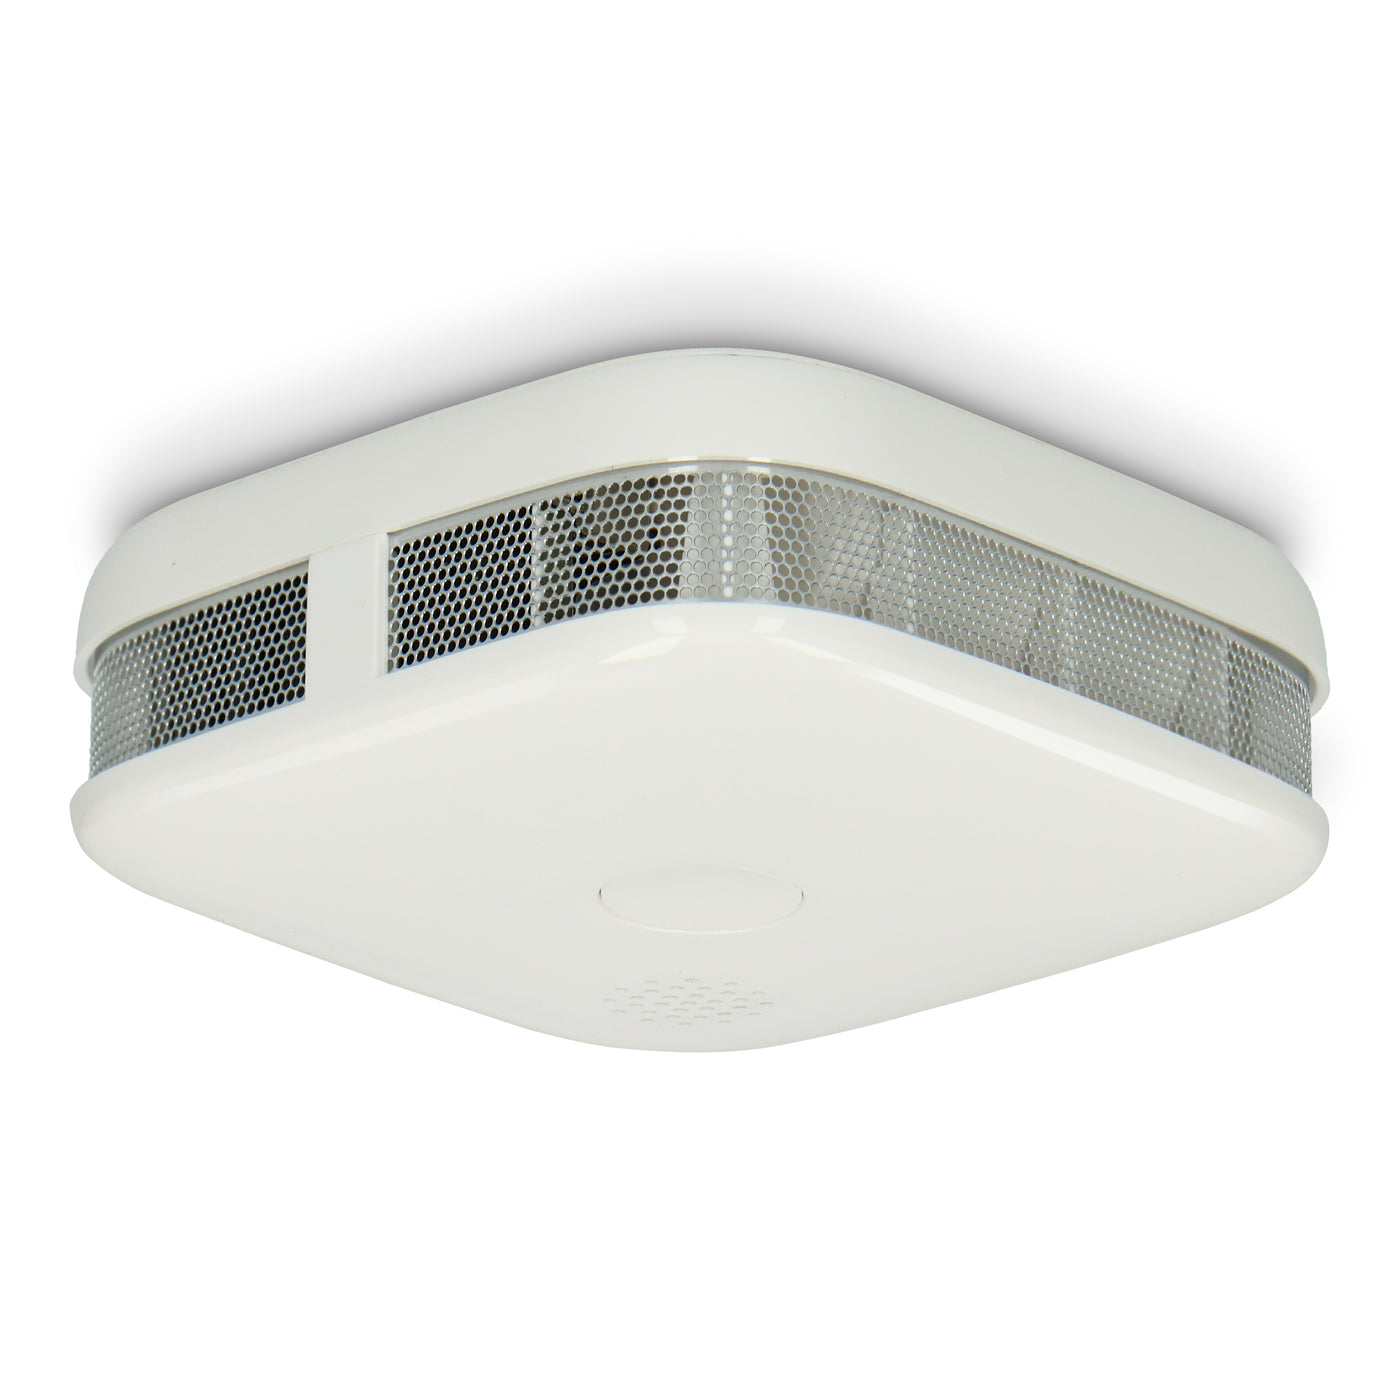 Alecto SA50 - Smoke detector with compact design - with 10 year battery and warranty